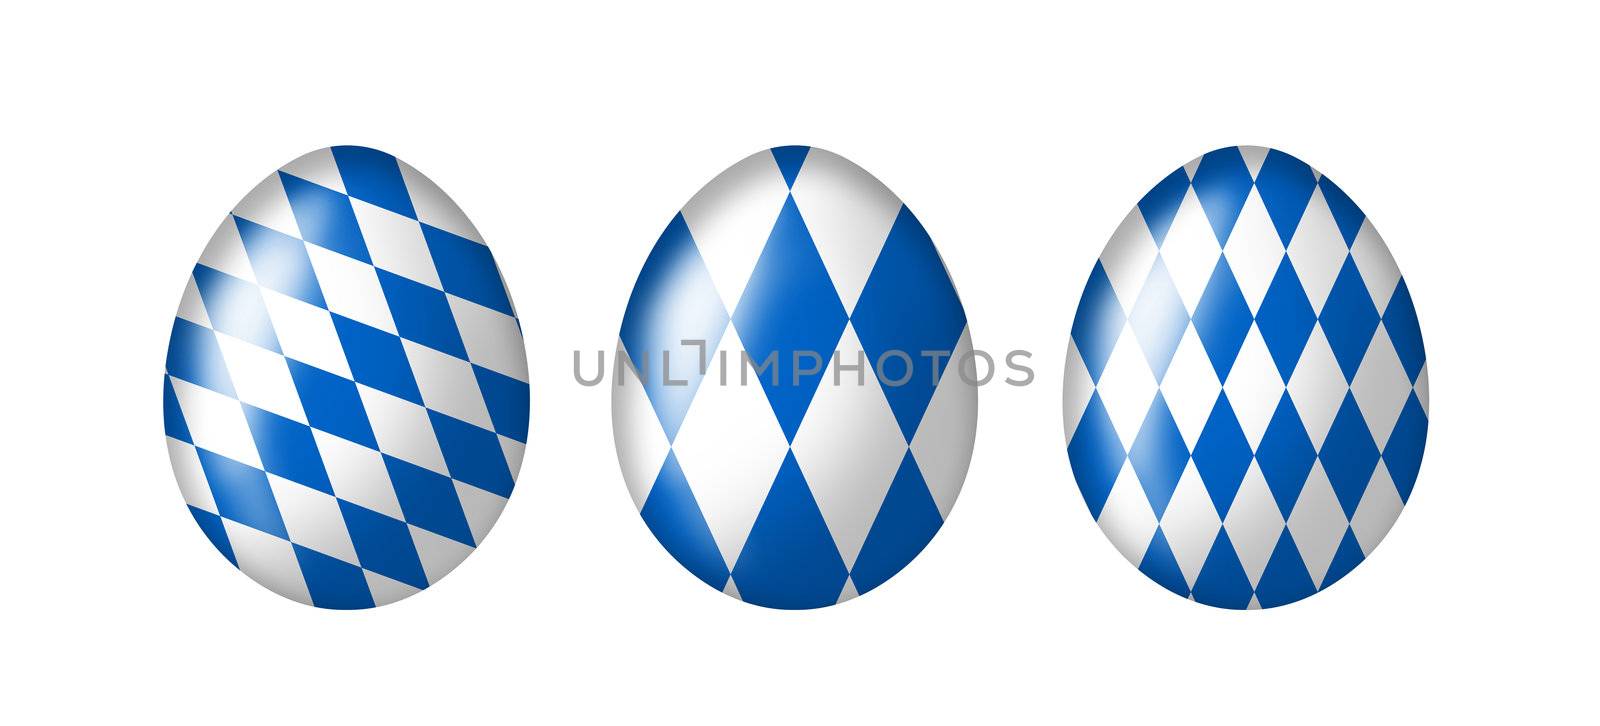 Bavarian Egg collection  by photochecker